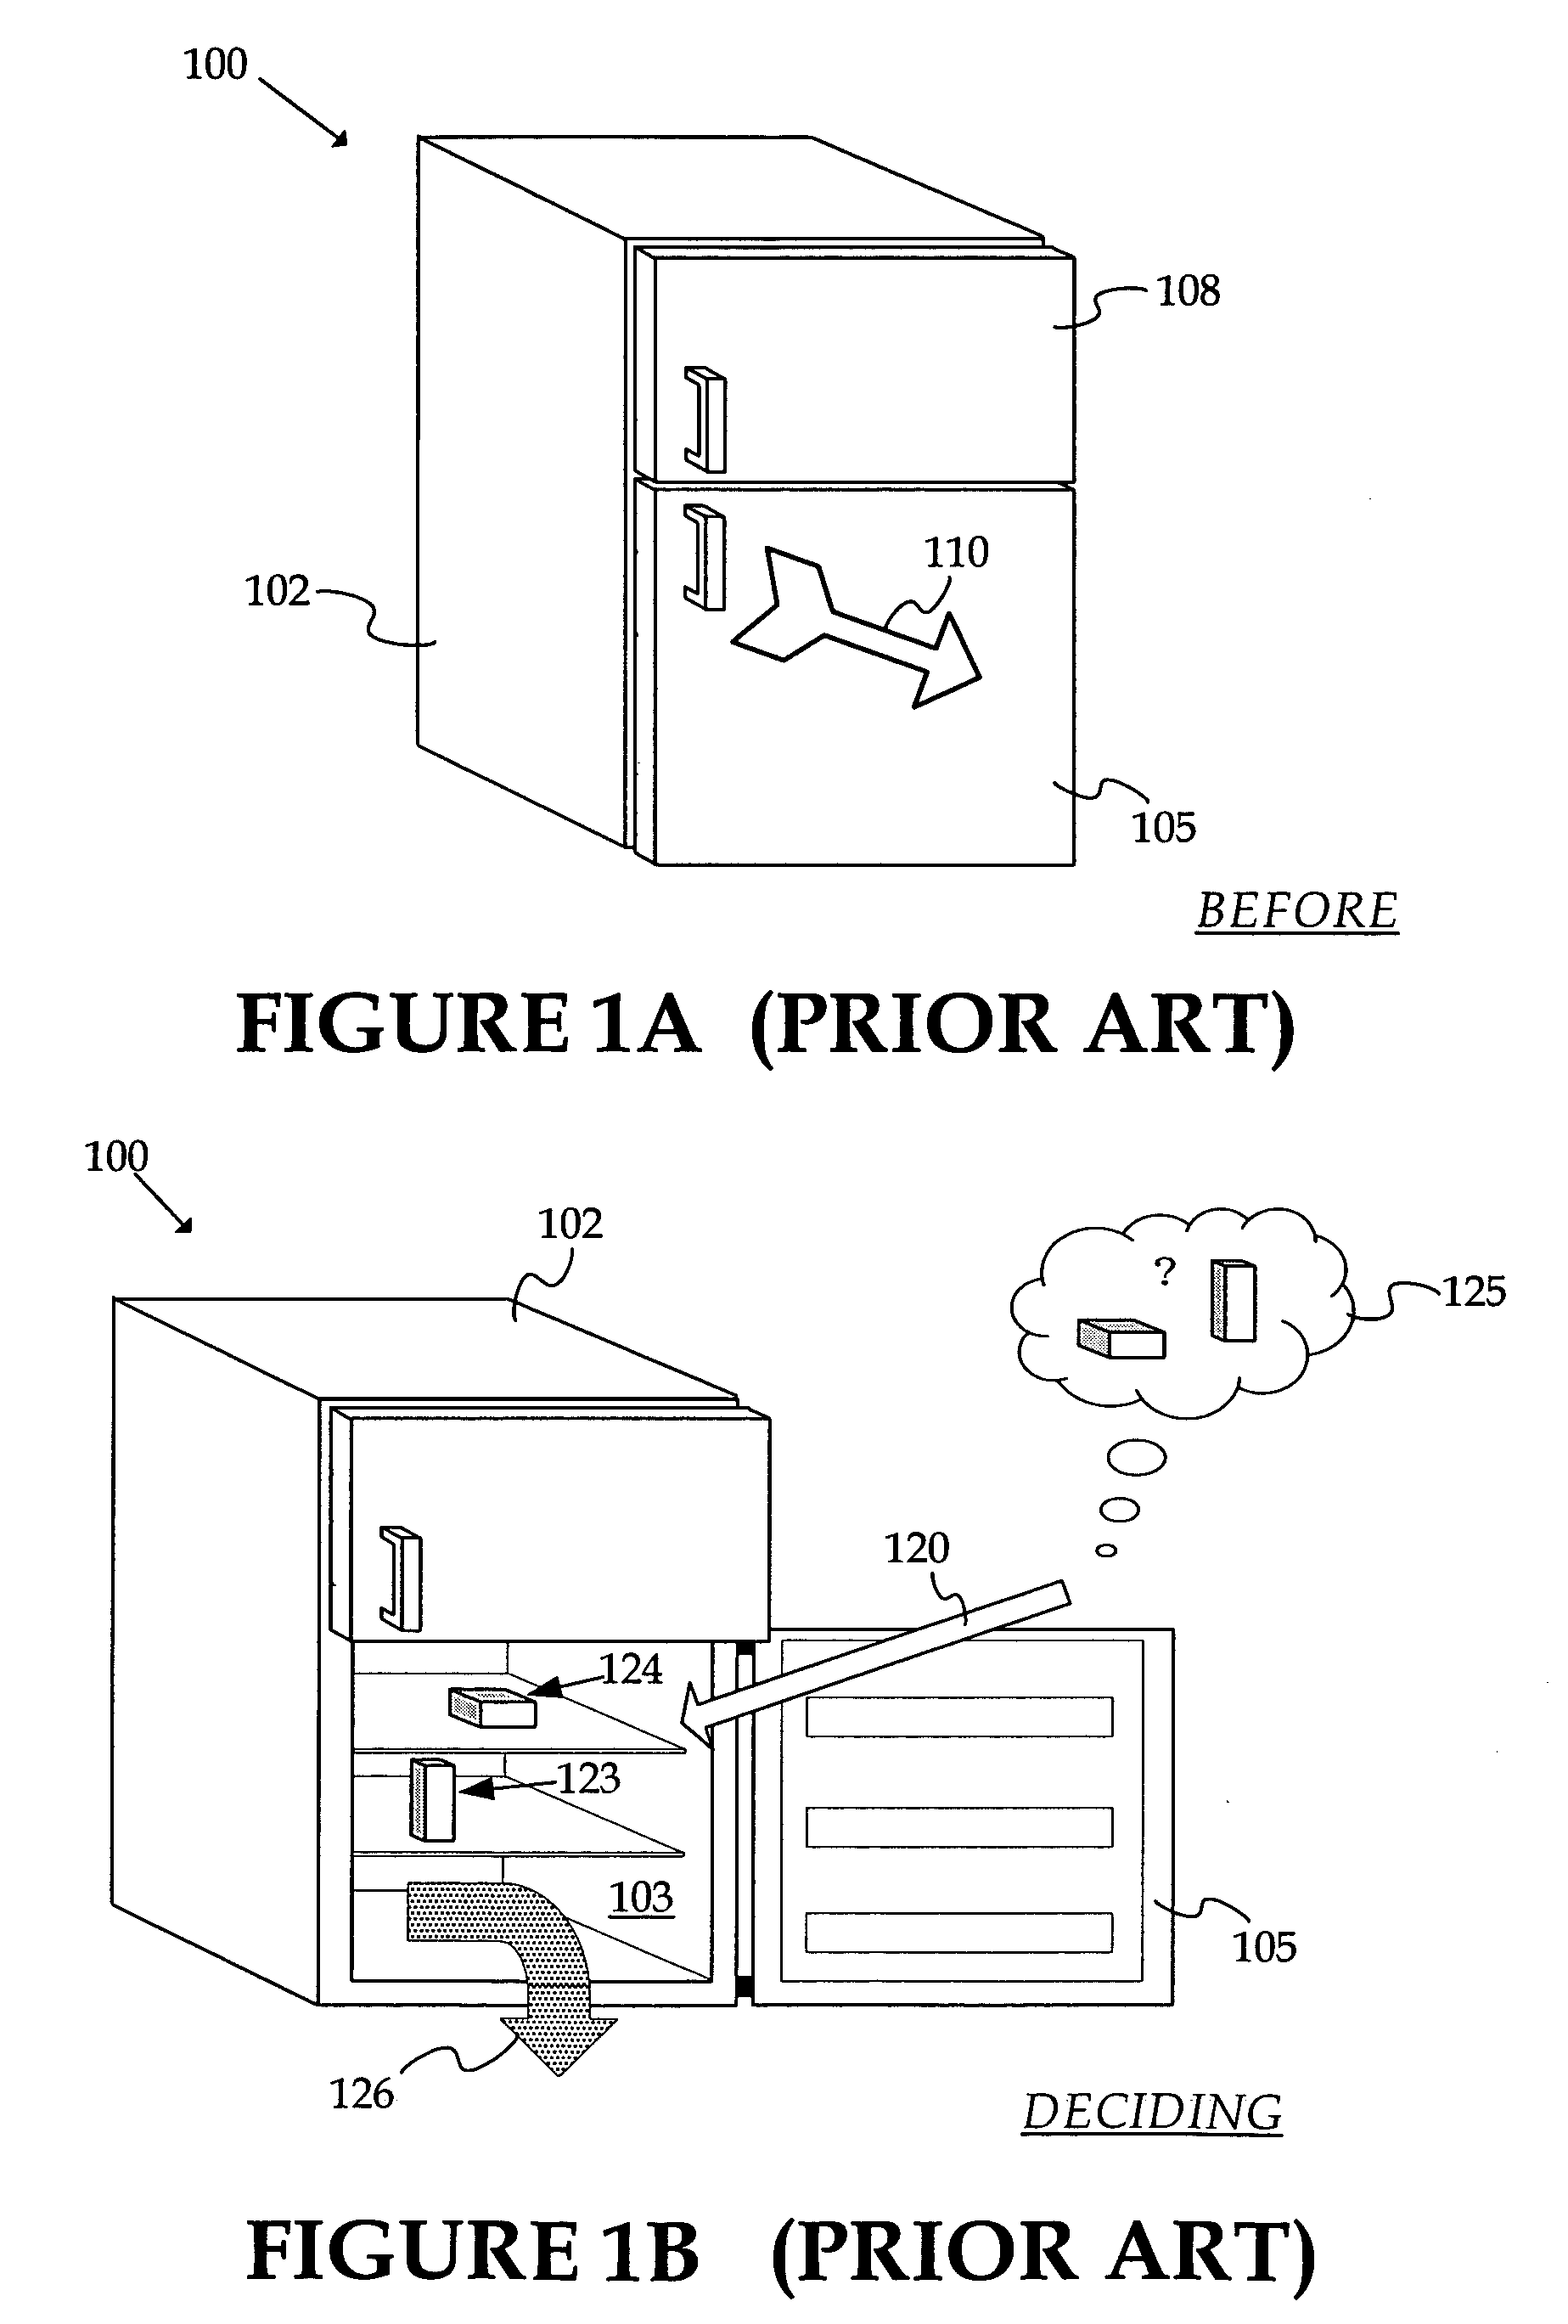 Home refrigerator systems imaging their interior and methods